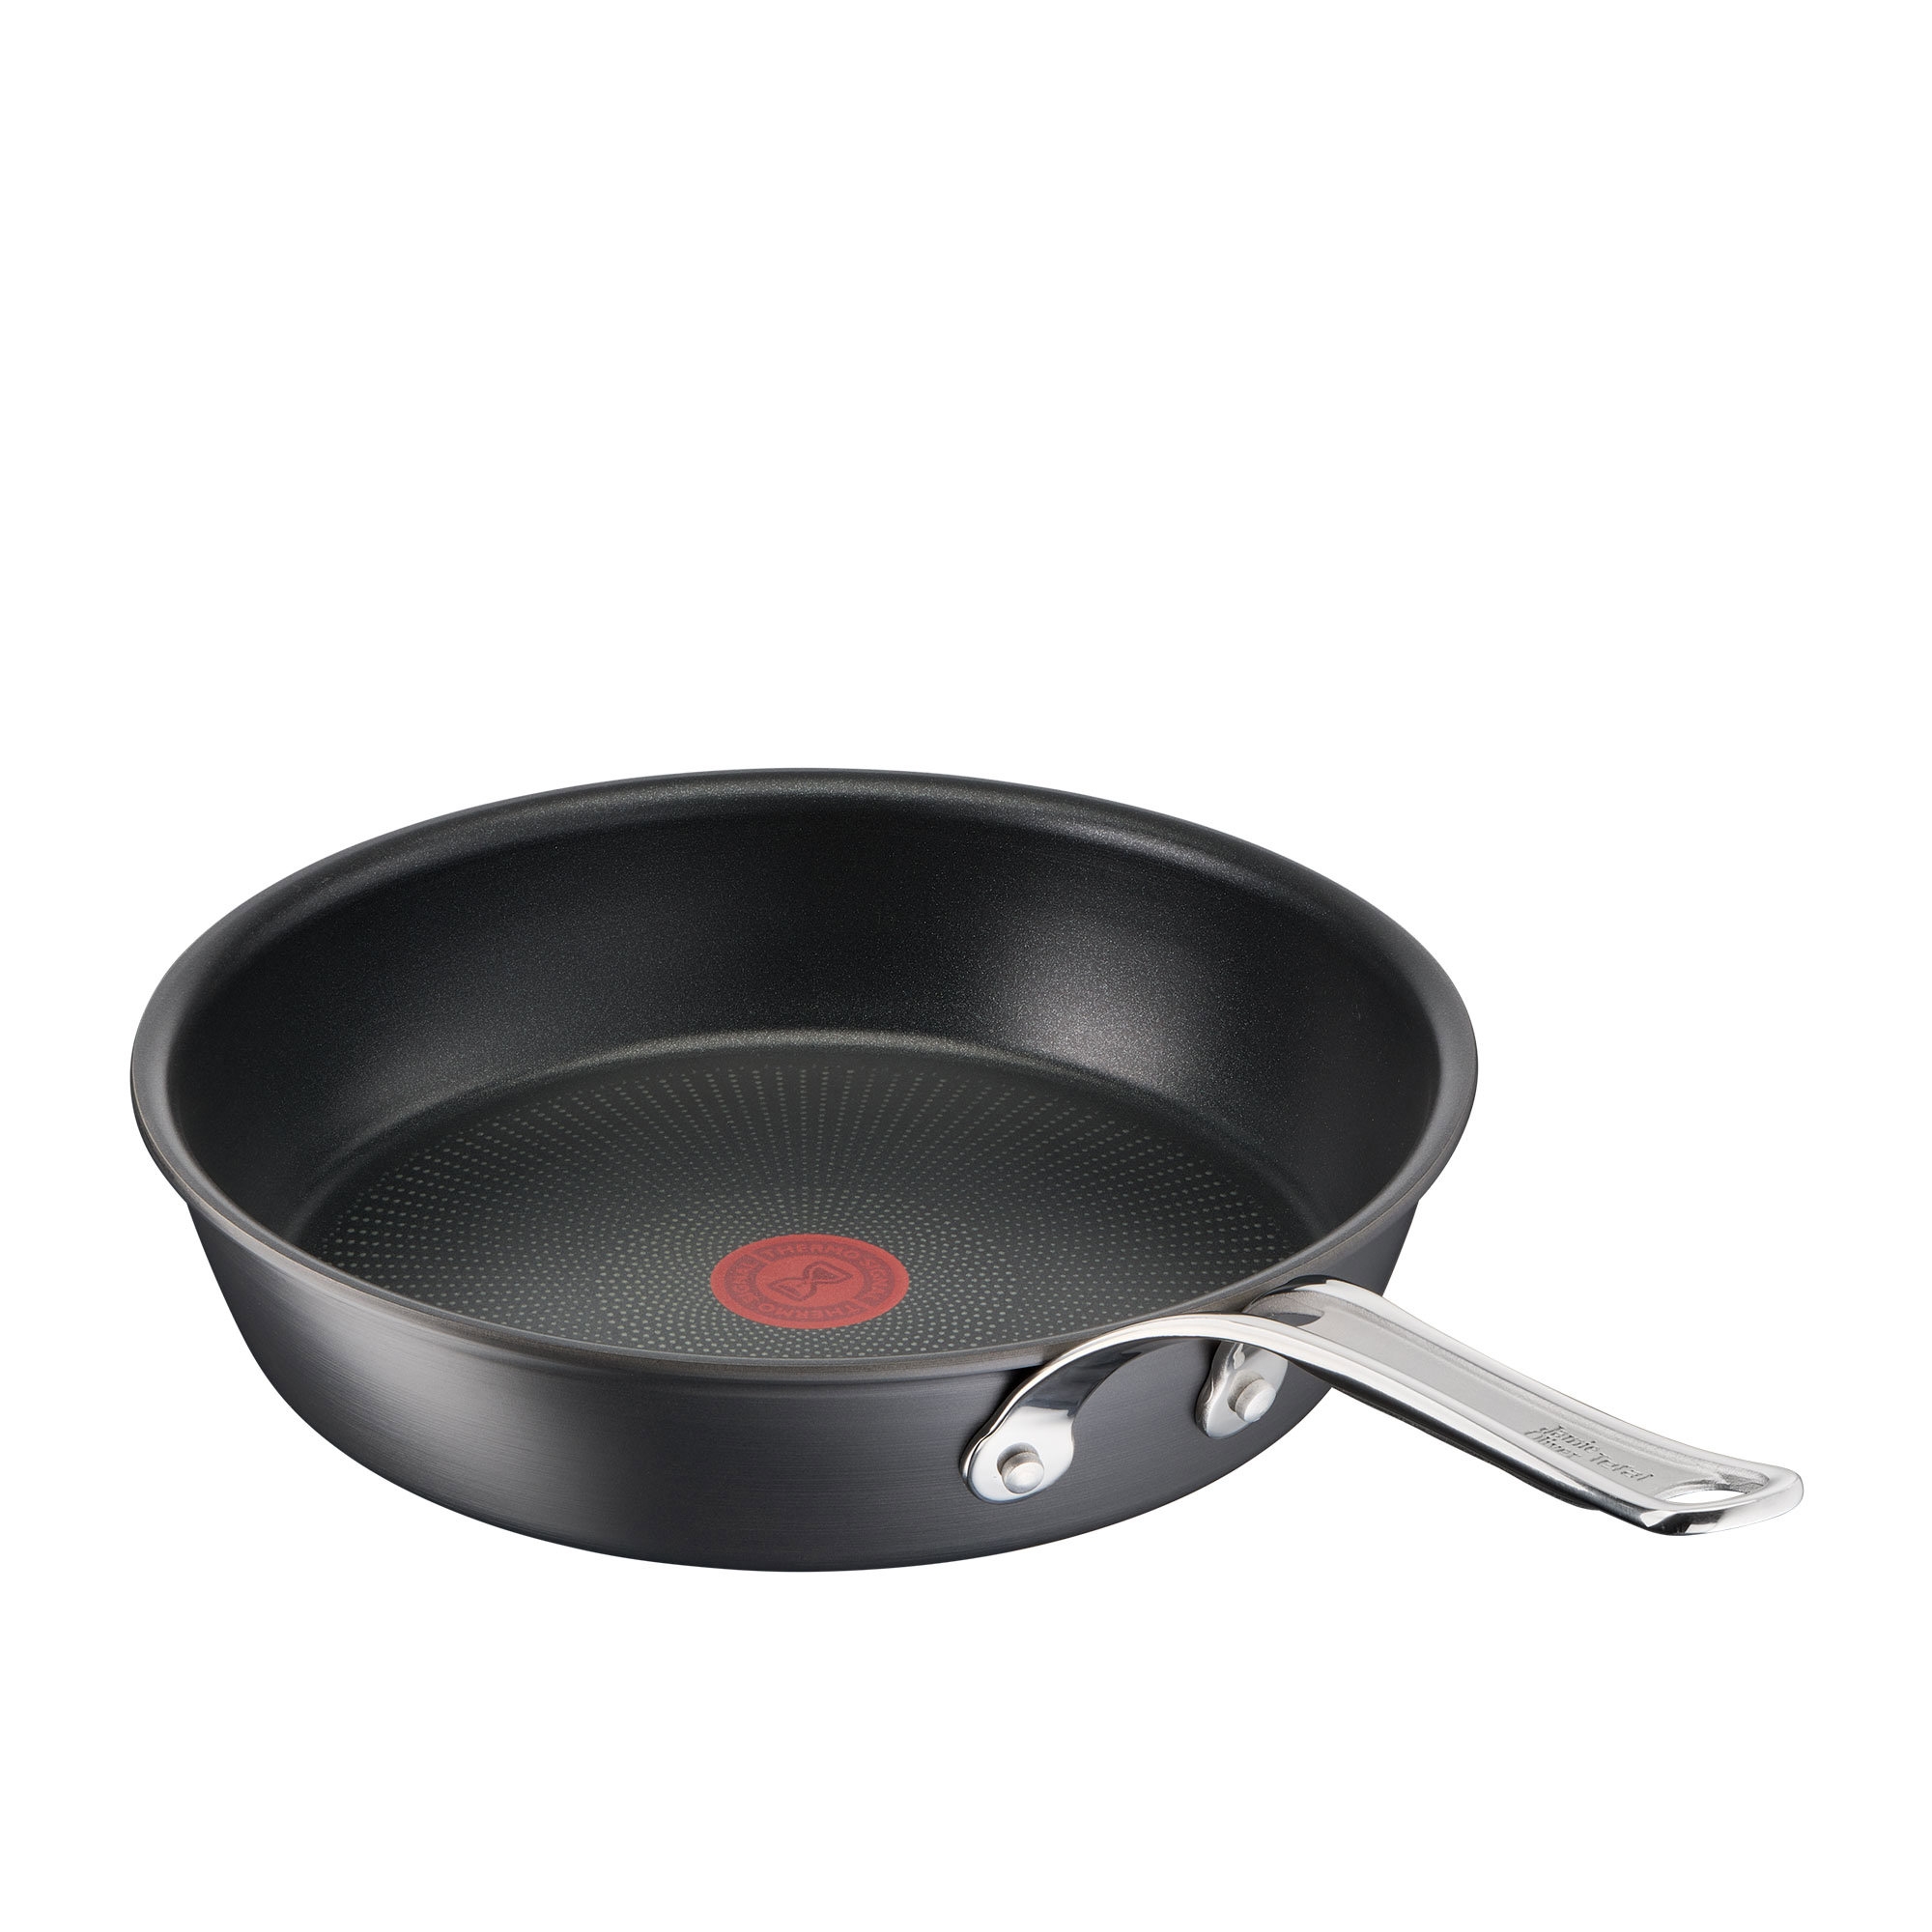 Jamie Oliver by Tefal Cook's Classic Hard Anodised Induction Frypan 30cm Image 2